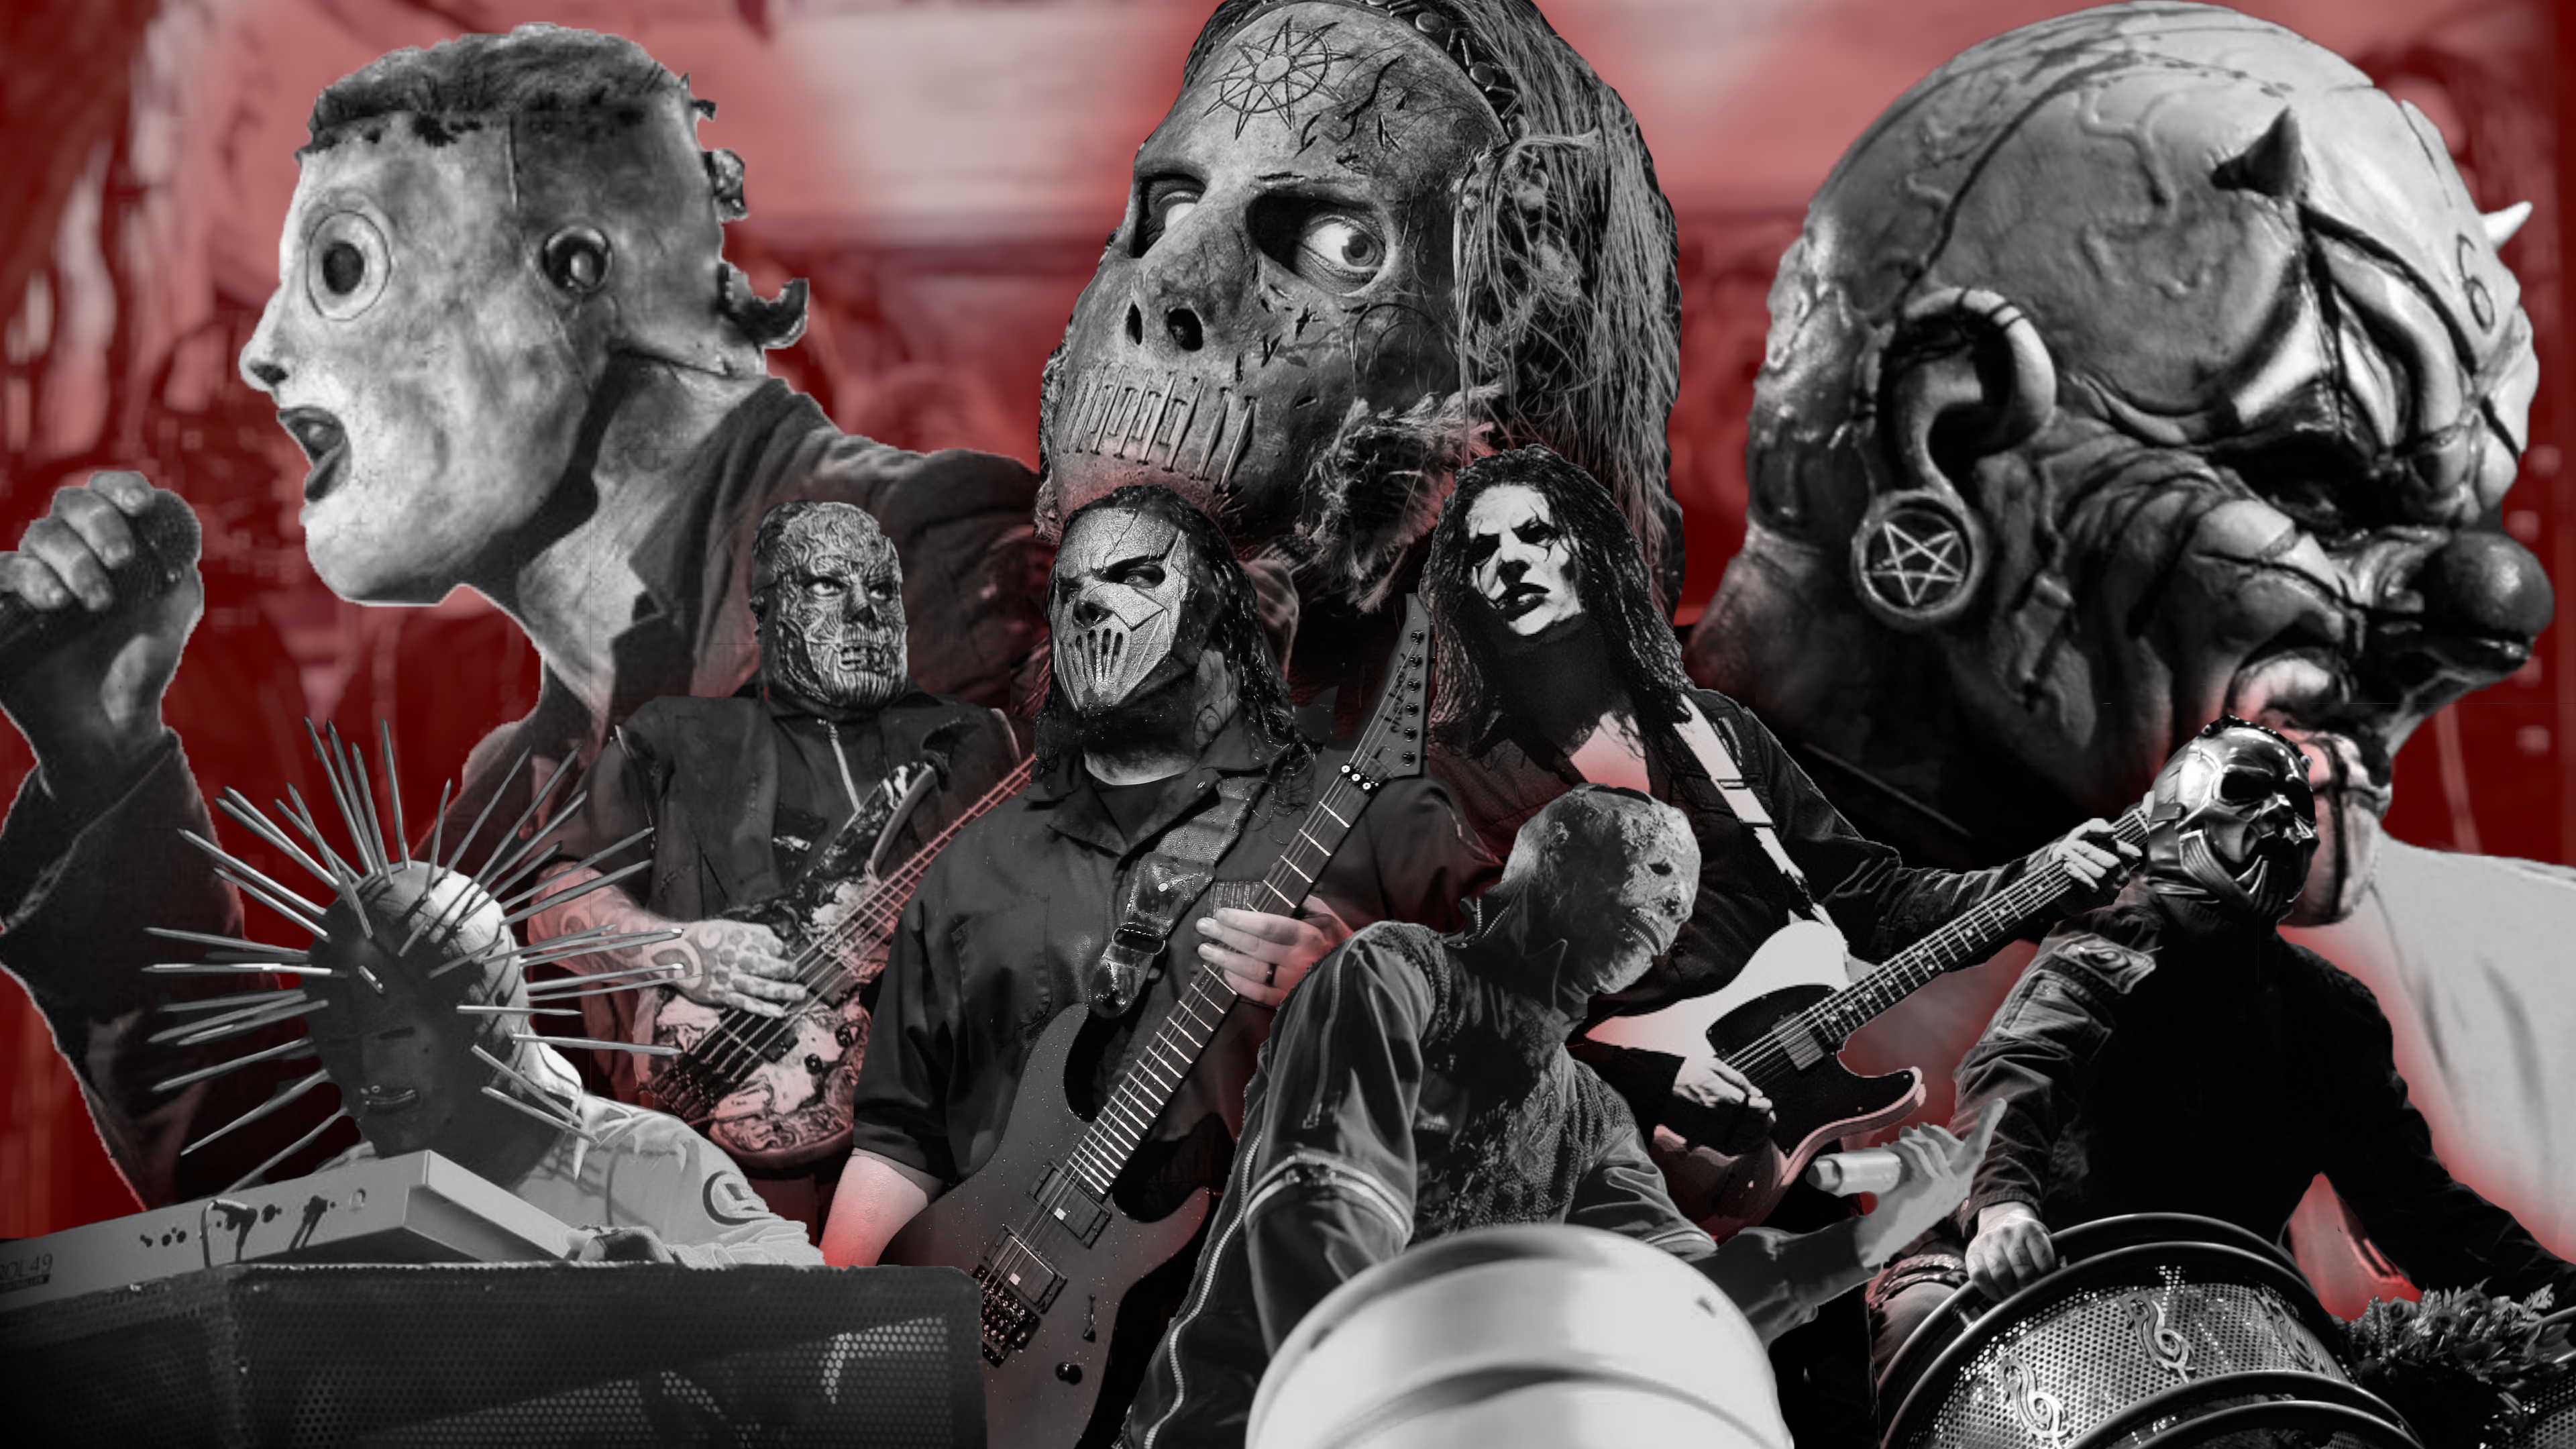 Made a wallpaper with the band with my favourite masks!